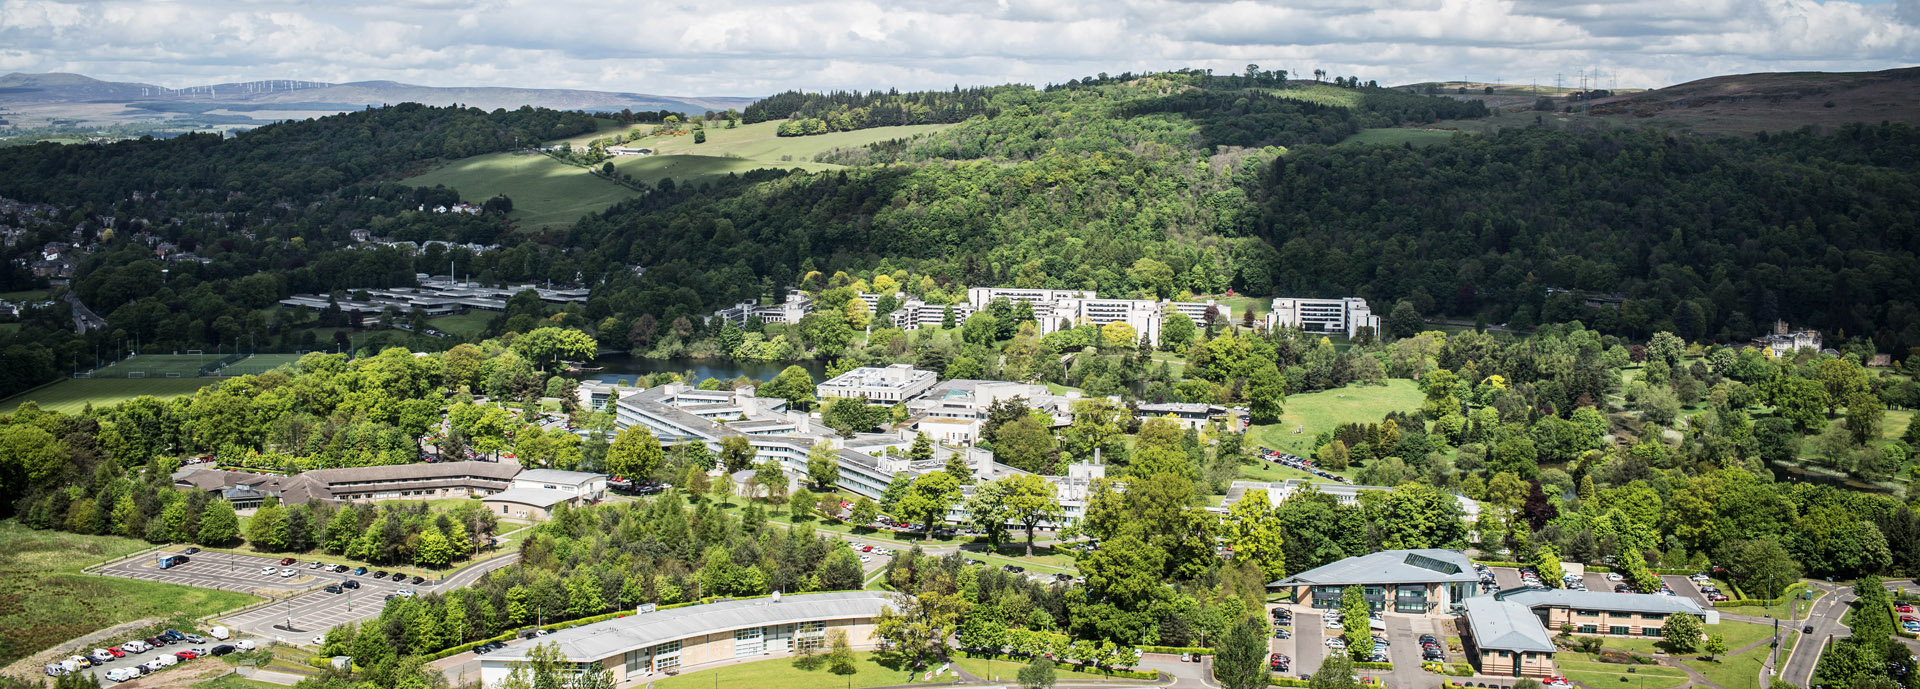 View of University of Stirling Campus from above